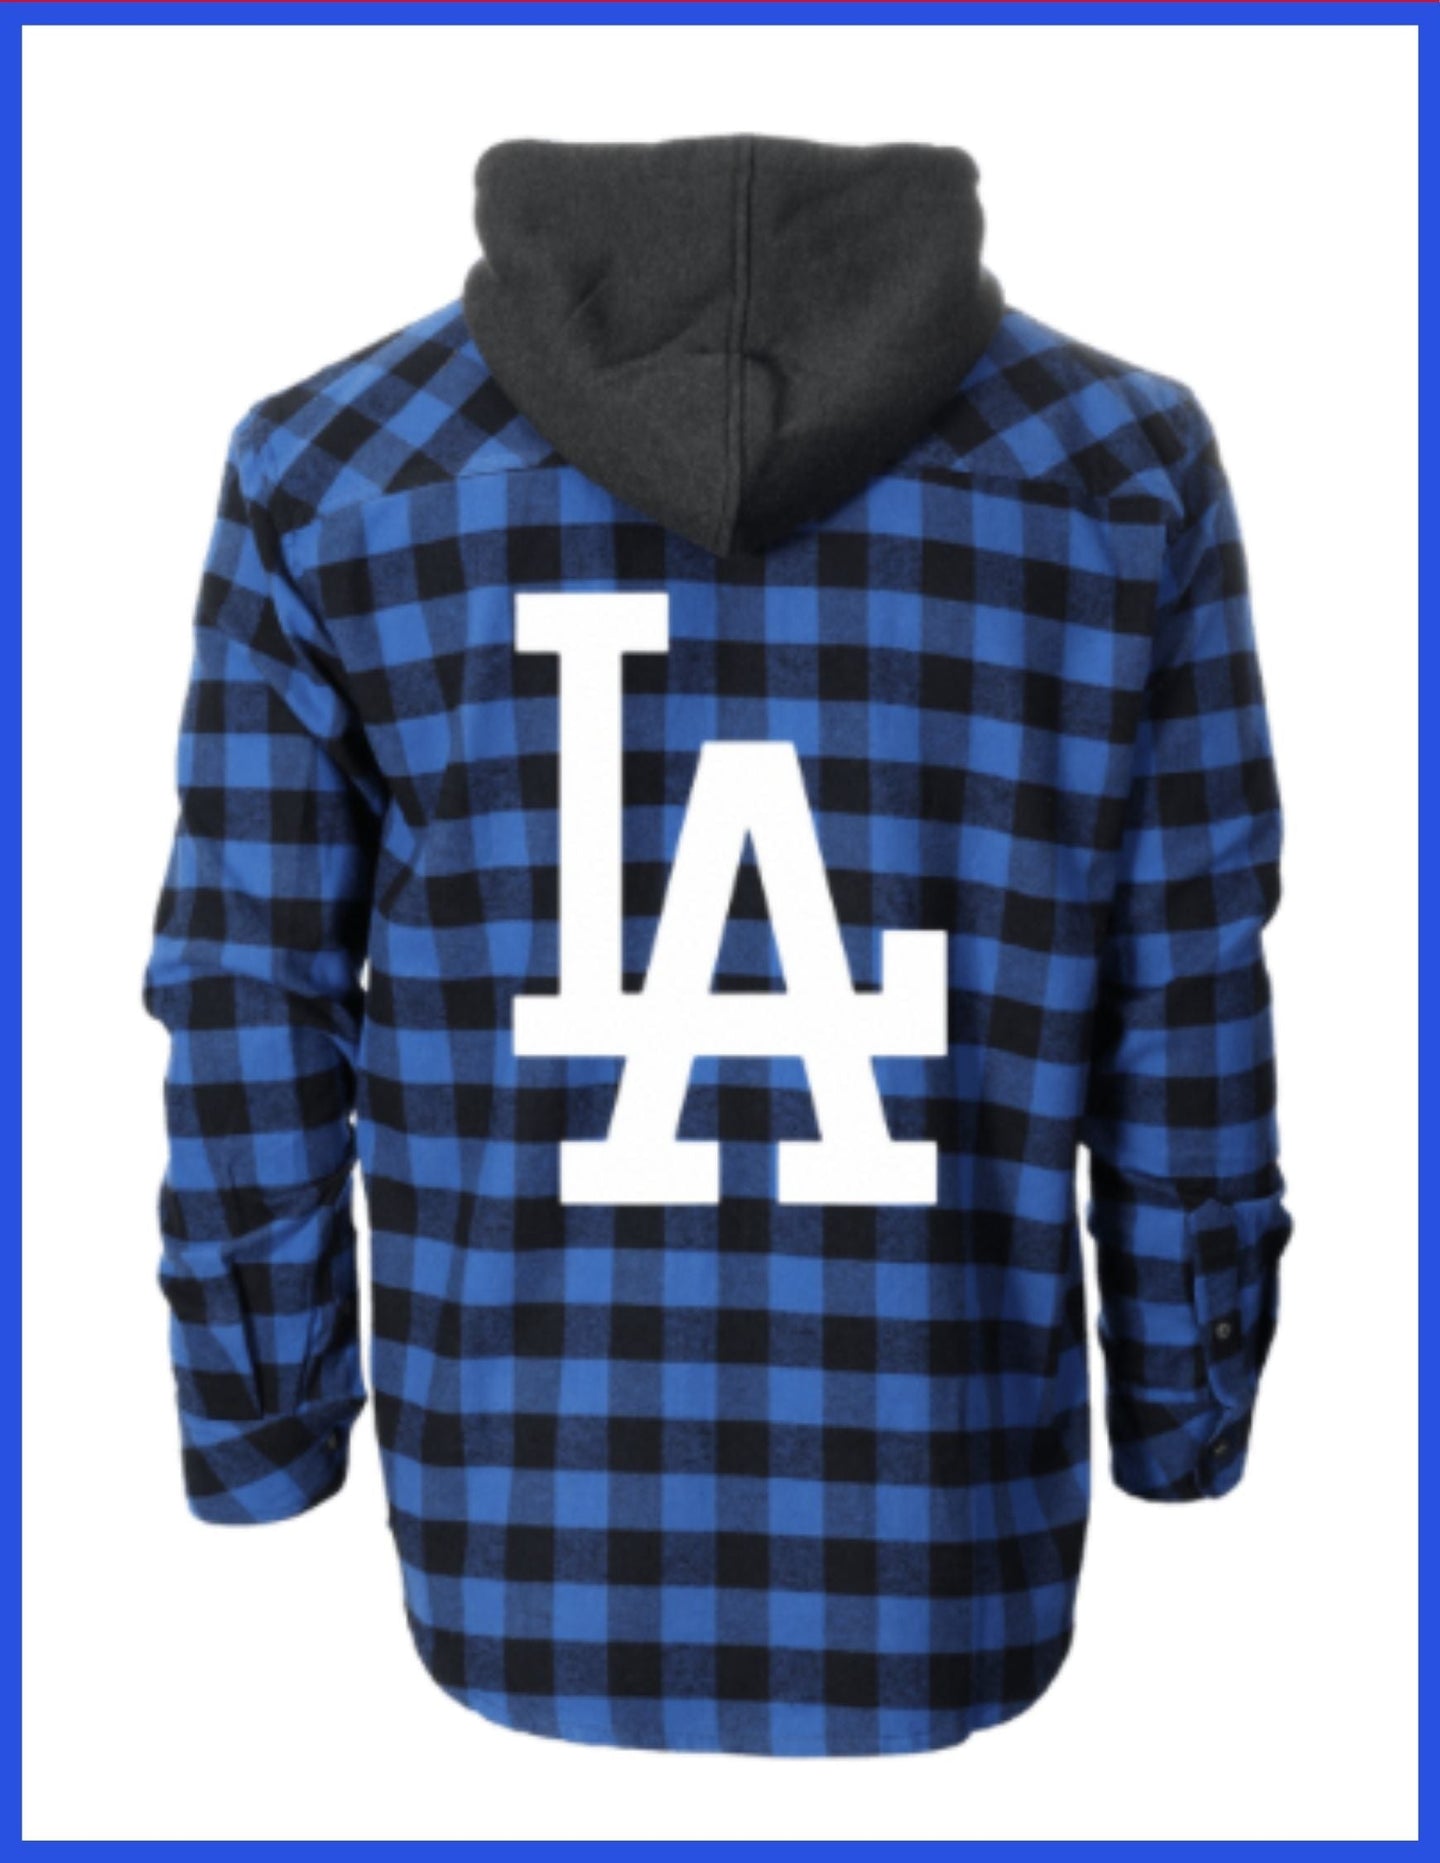 Men's L.A Logo Flannel Shirts Checkered Style Light Weight with Removable Hoodie.